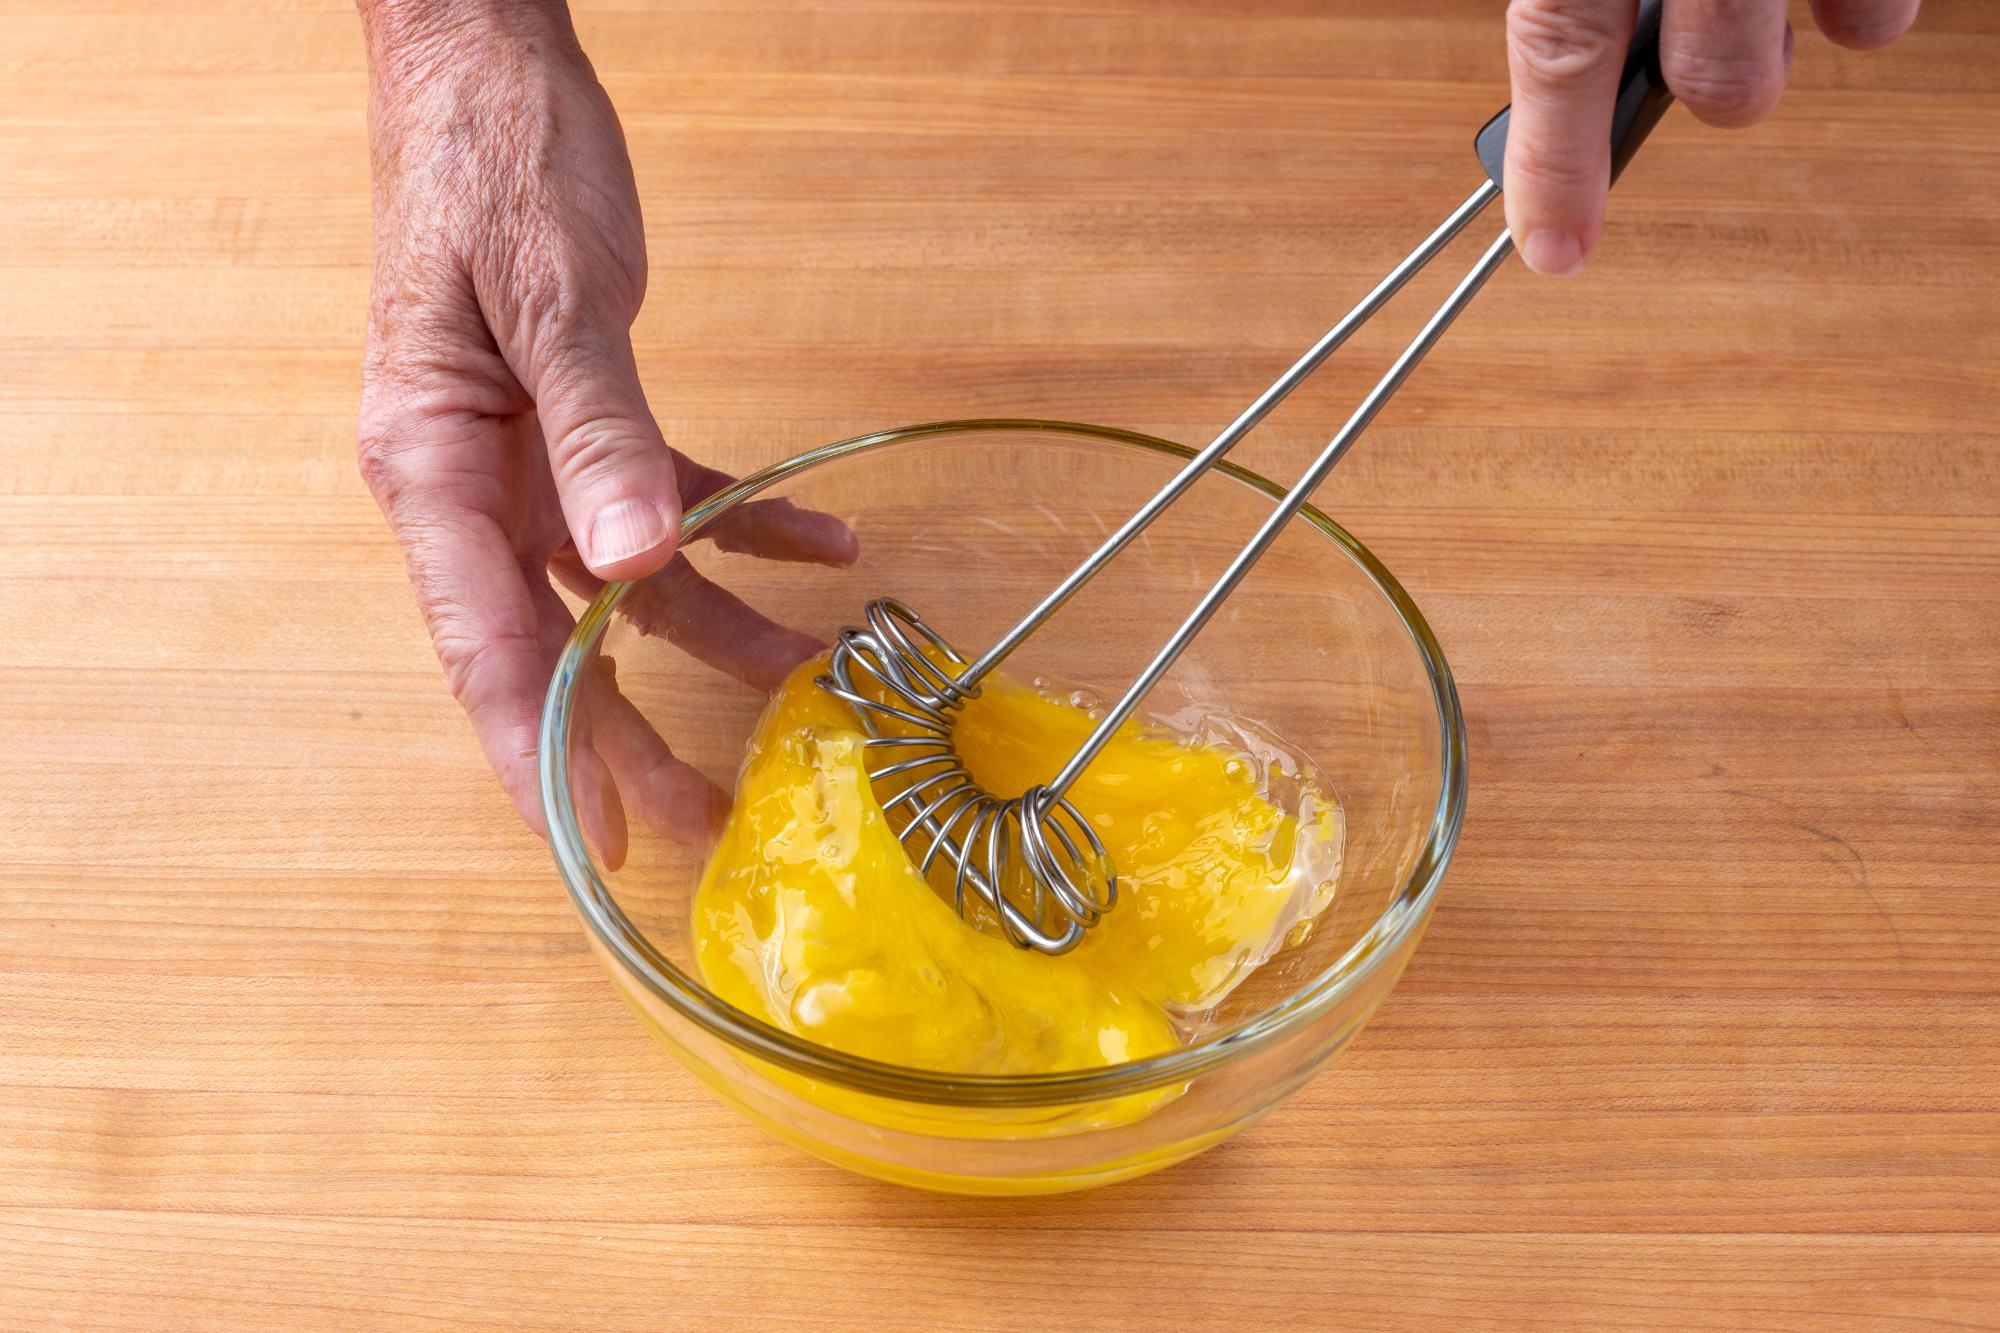 Mix-Stir being used to beat eggs.